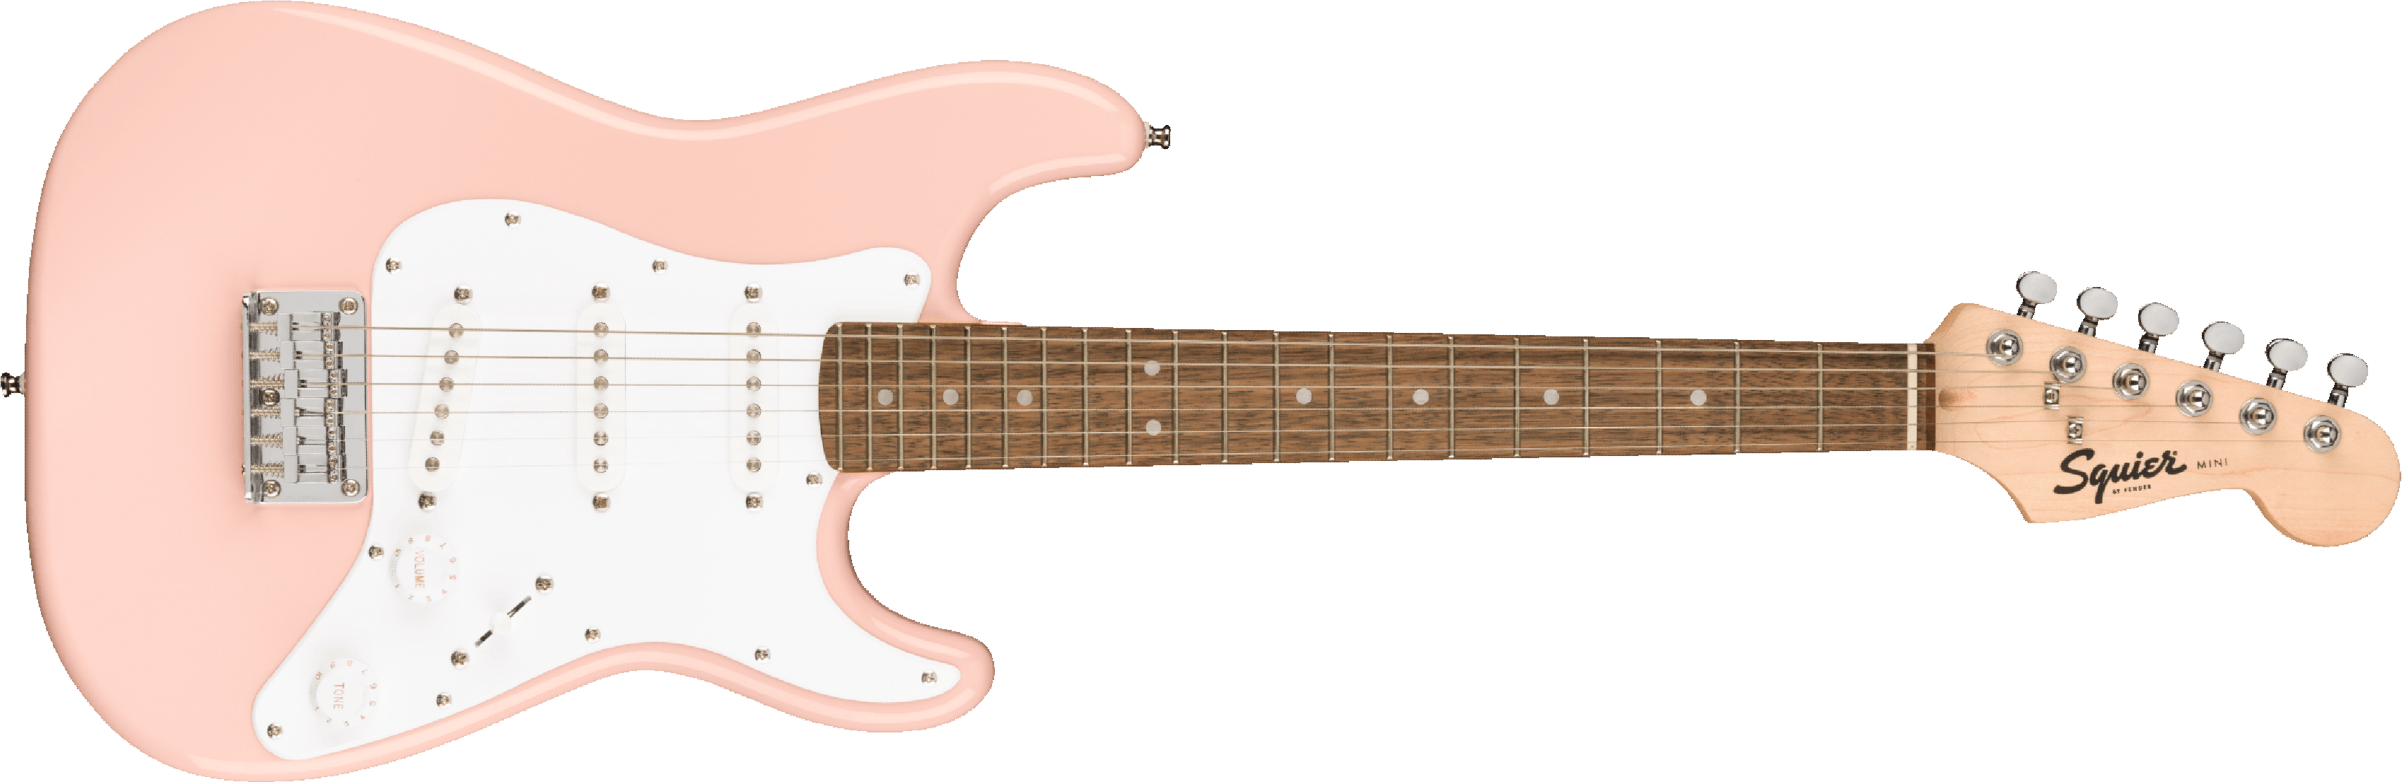 Squier Squier Mini Strat V2 Ht Sss Lau - Shell Pink - Electric guitar for kids - Main picture